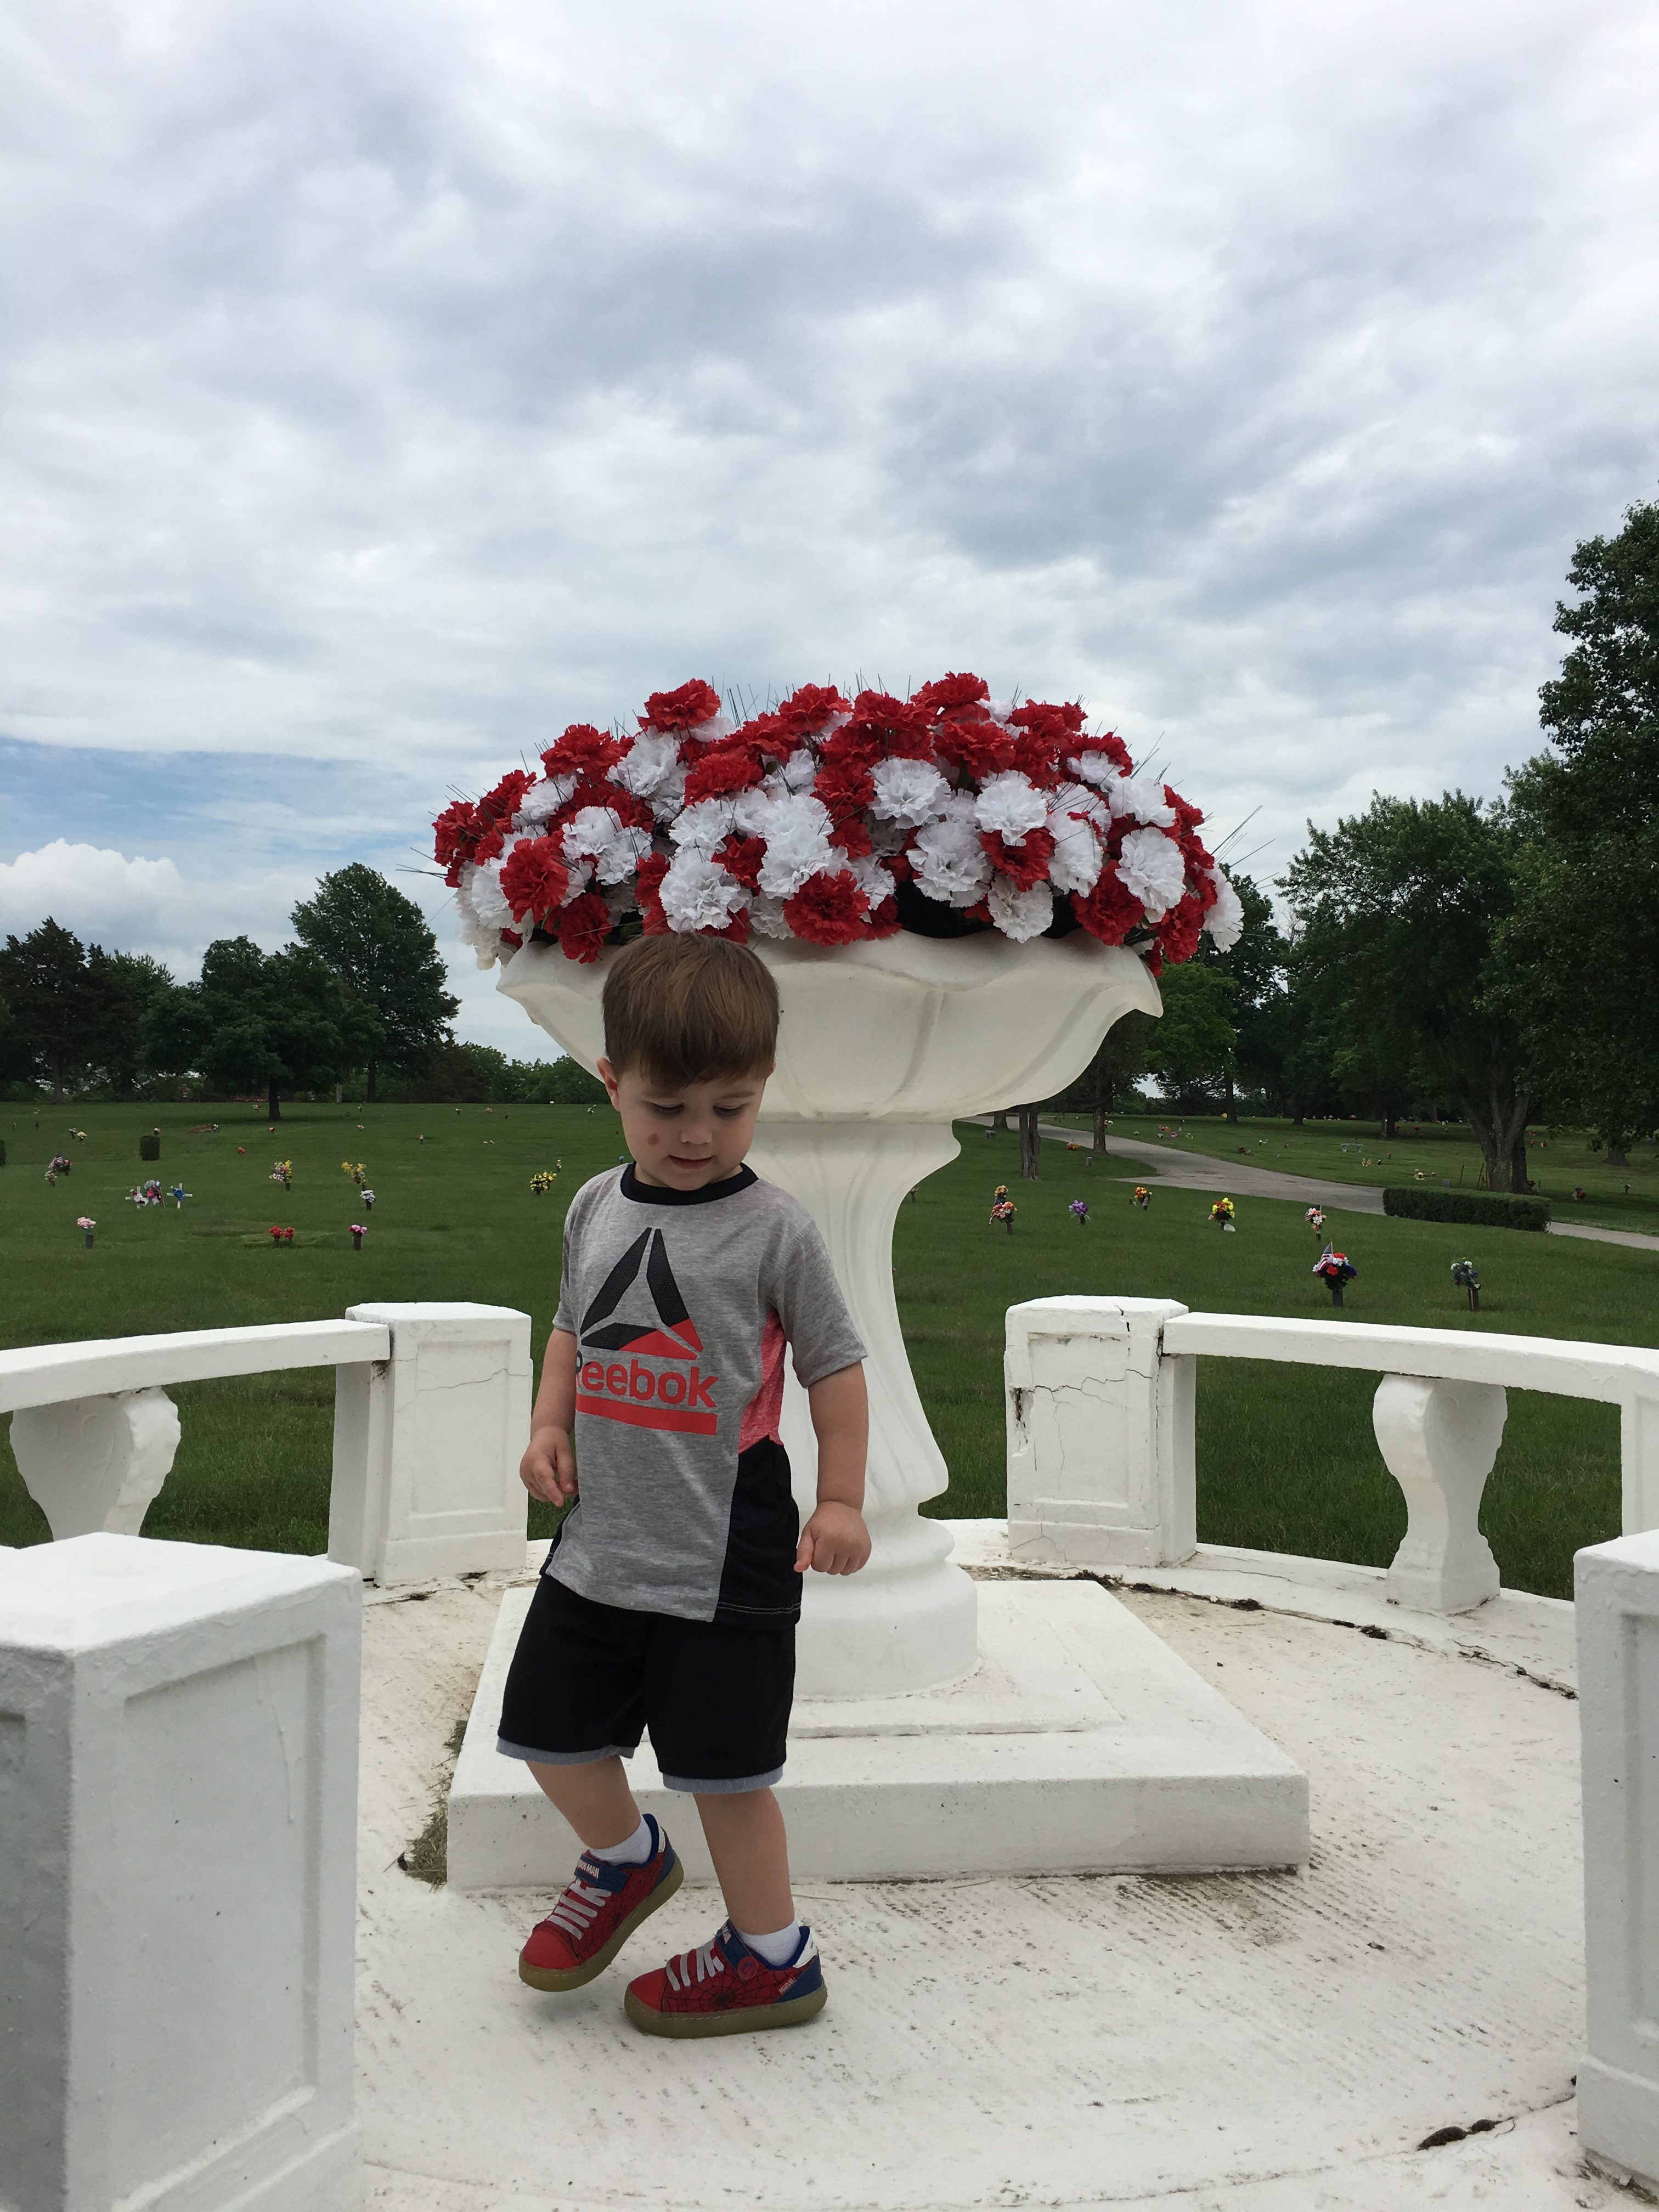 Memorial Day Weekend Recap 2018: How our family of 4 spent Memorial Weekend in Kansas City! Most importantly, we had lots of quality family time. Memorial Day weekend is the kick-off to summer, so here are some family-friendly summer activities for Kansas City families.